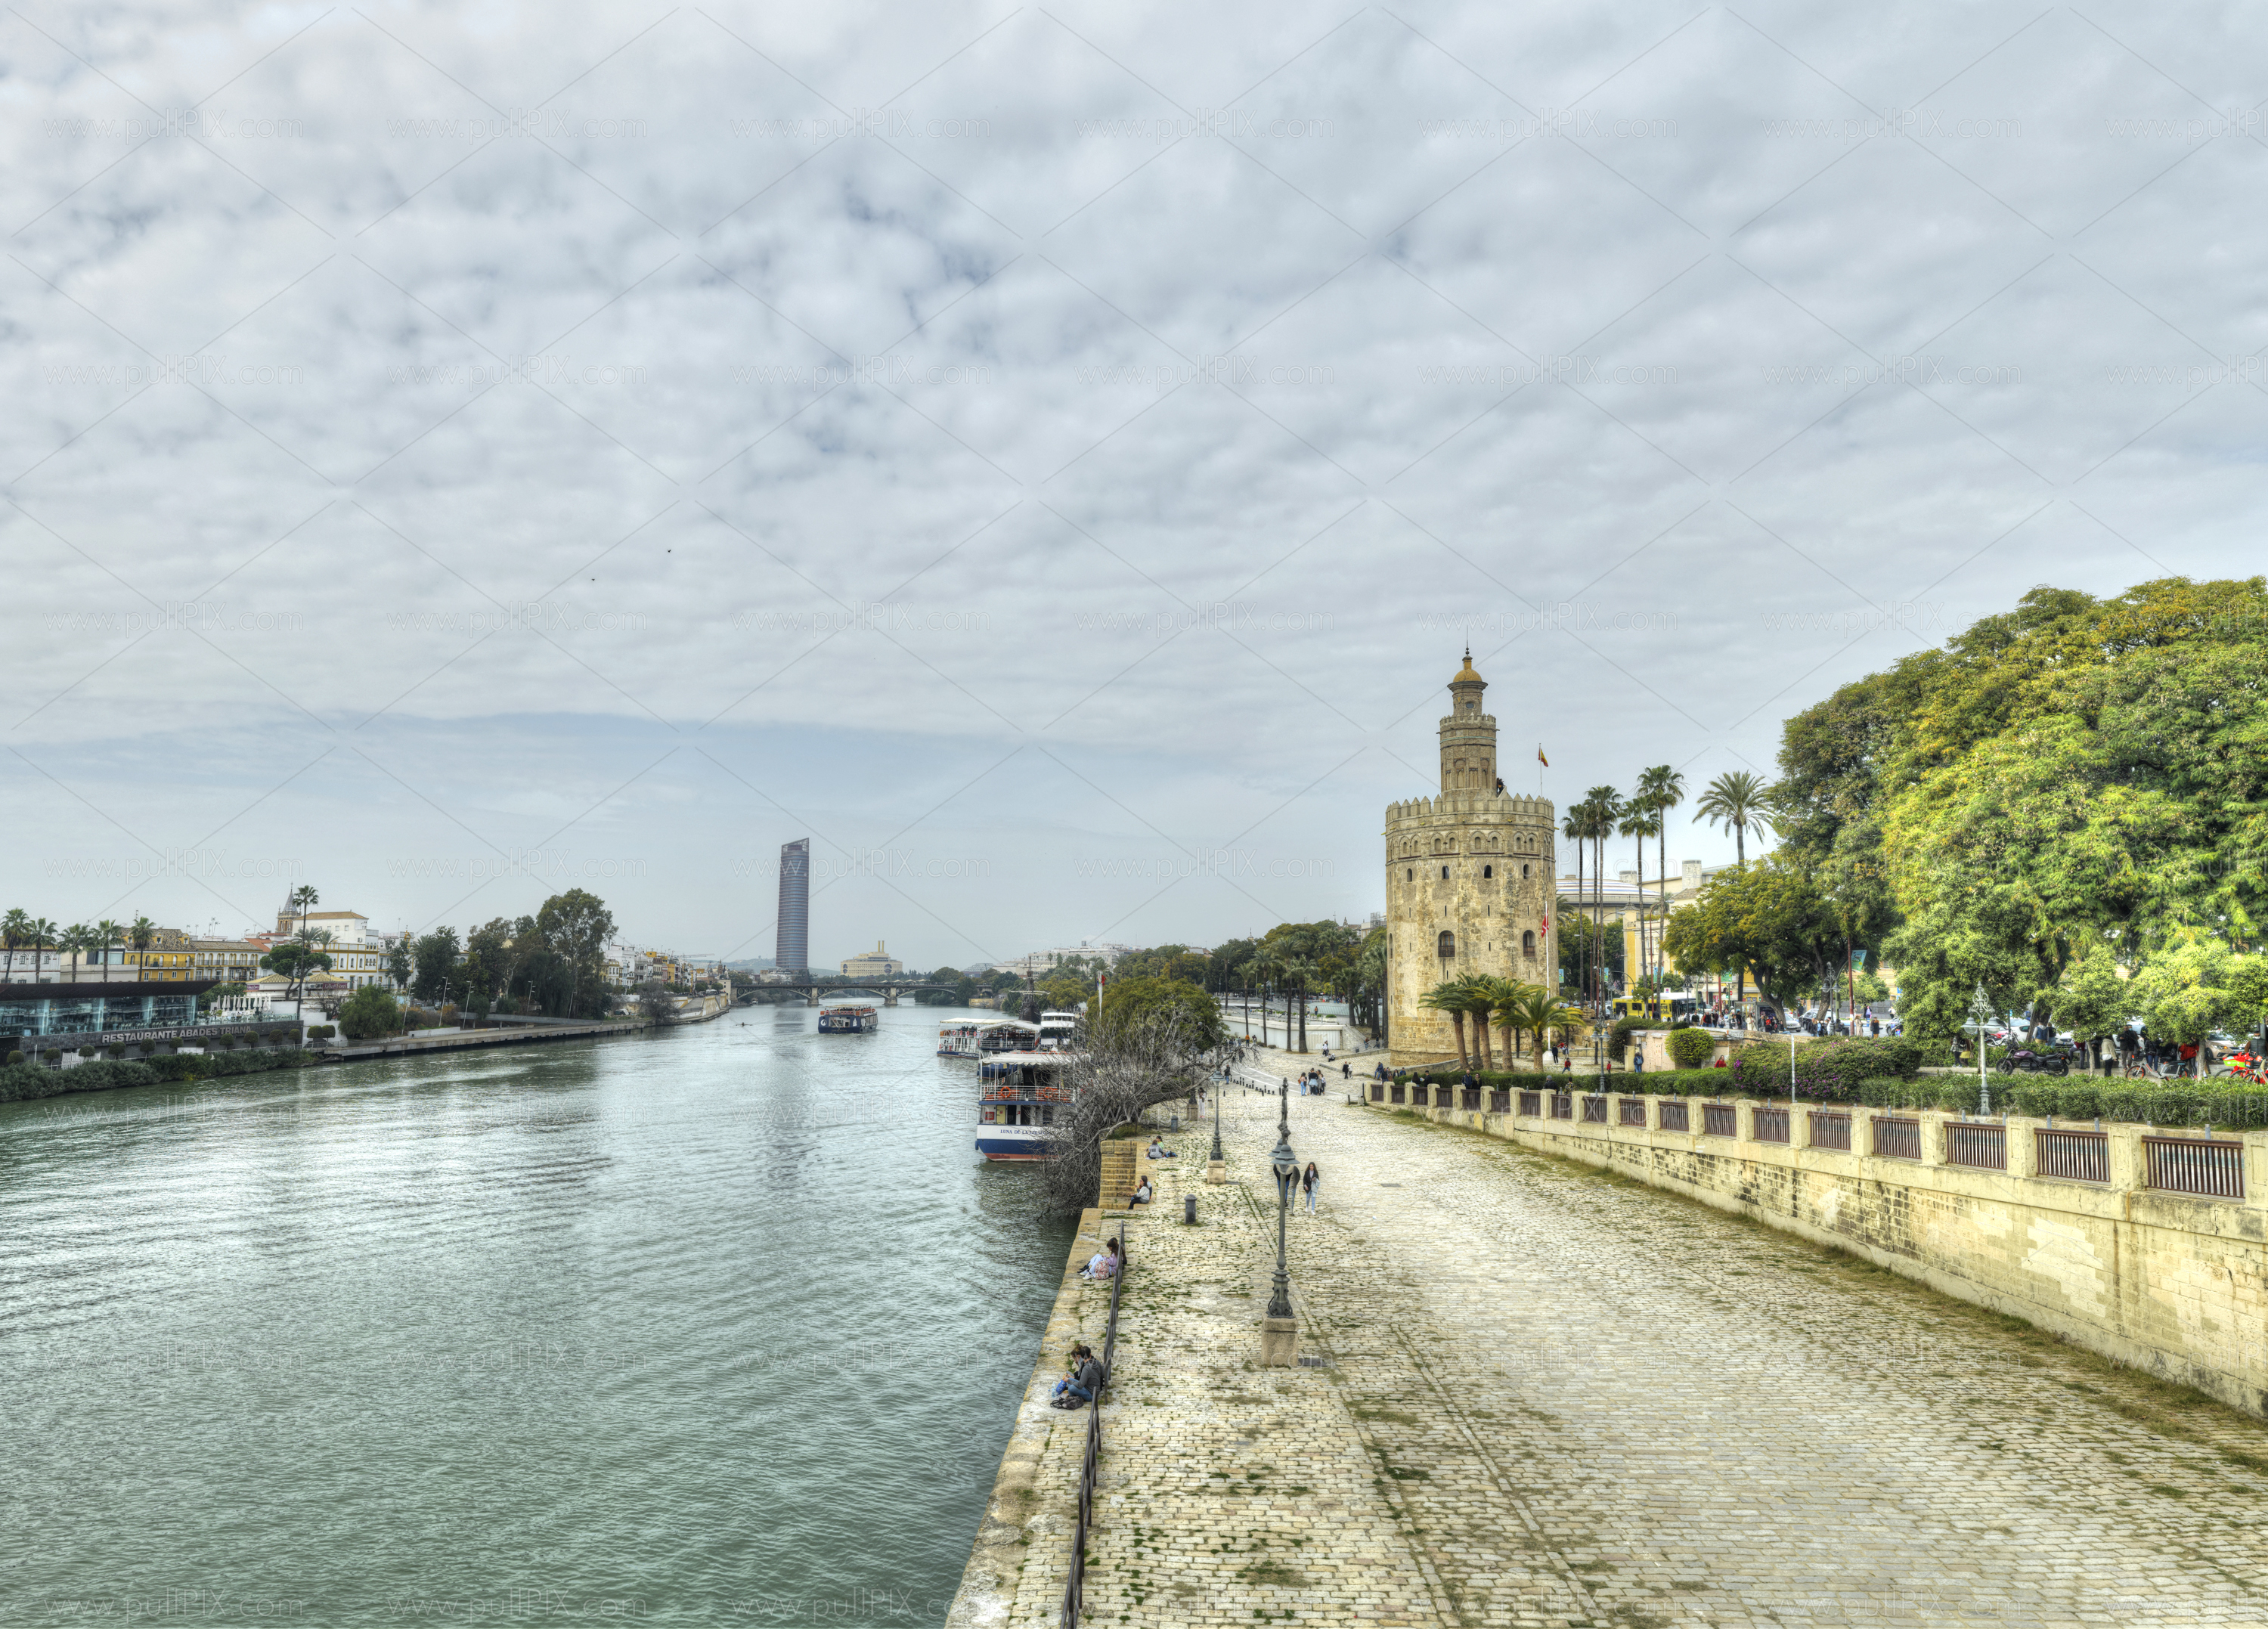 Preview canal de alfonso XIII_HDR.jpg